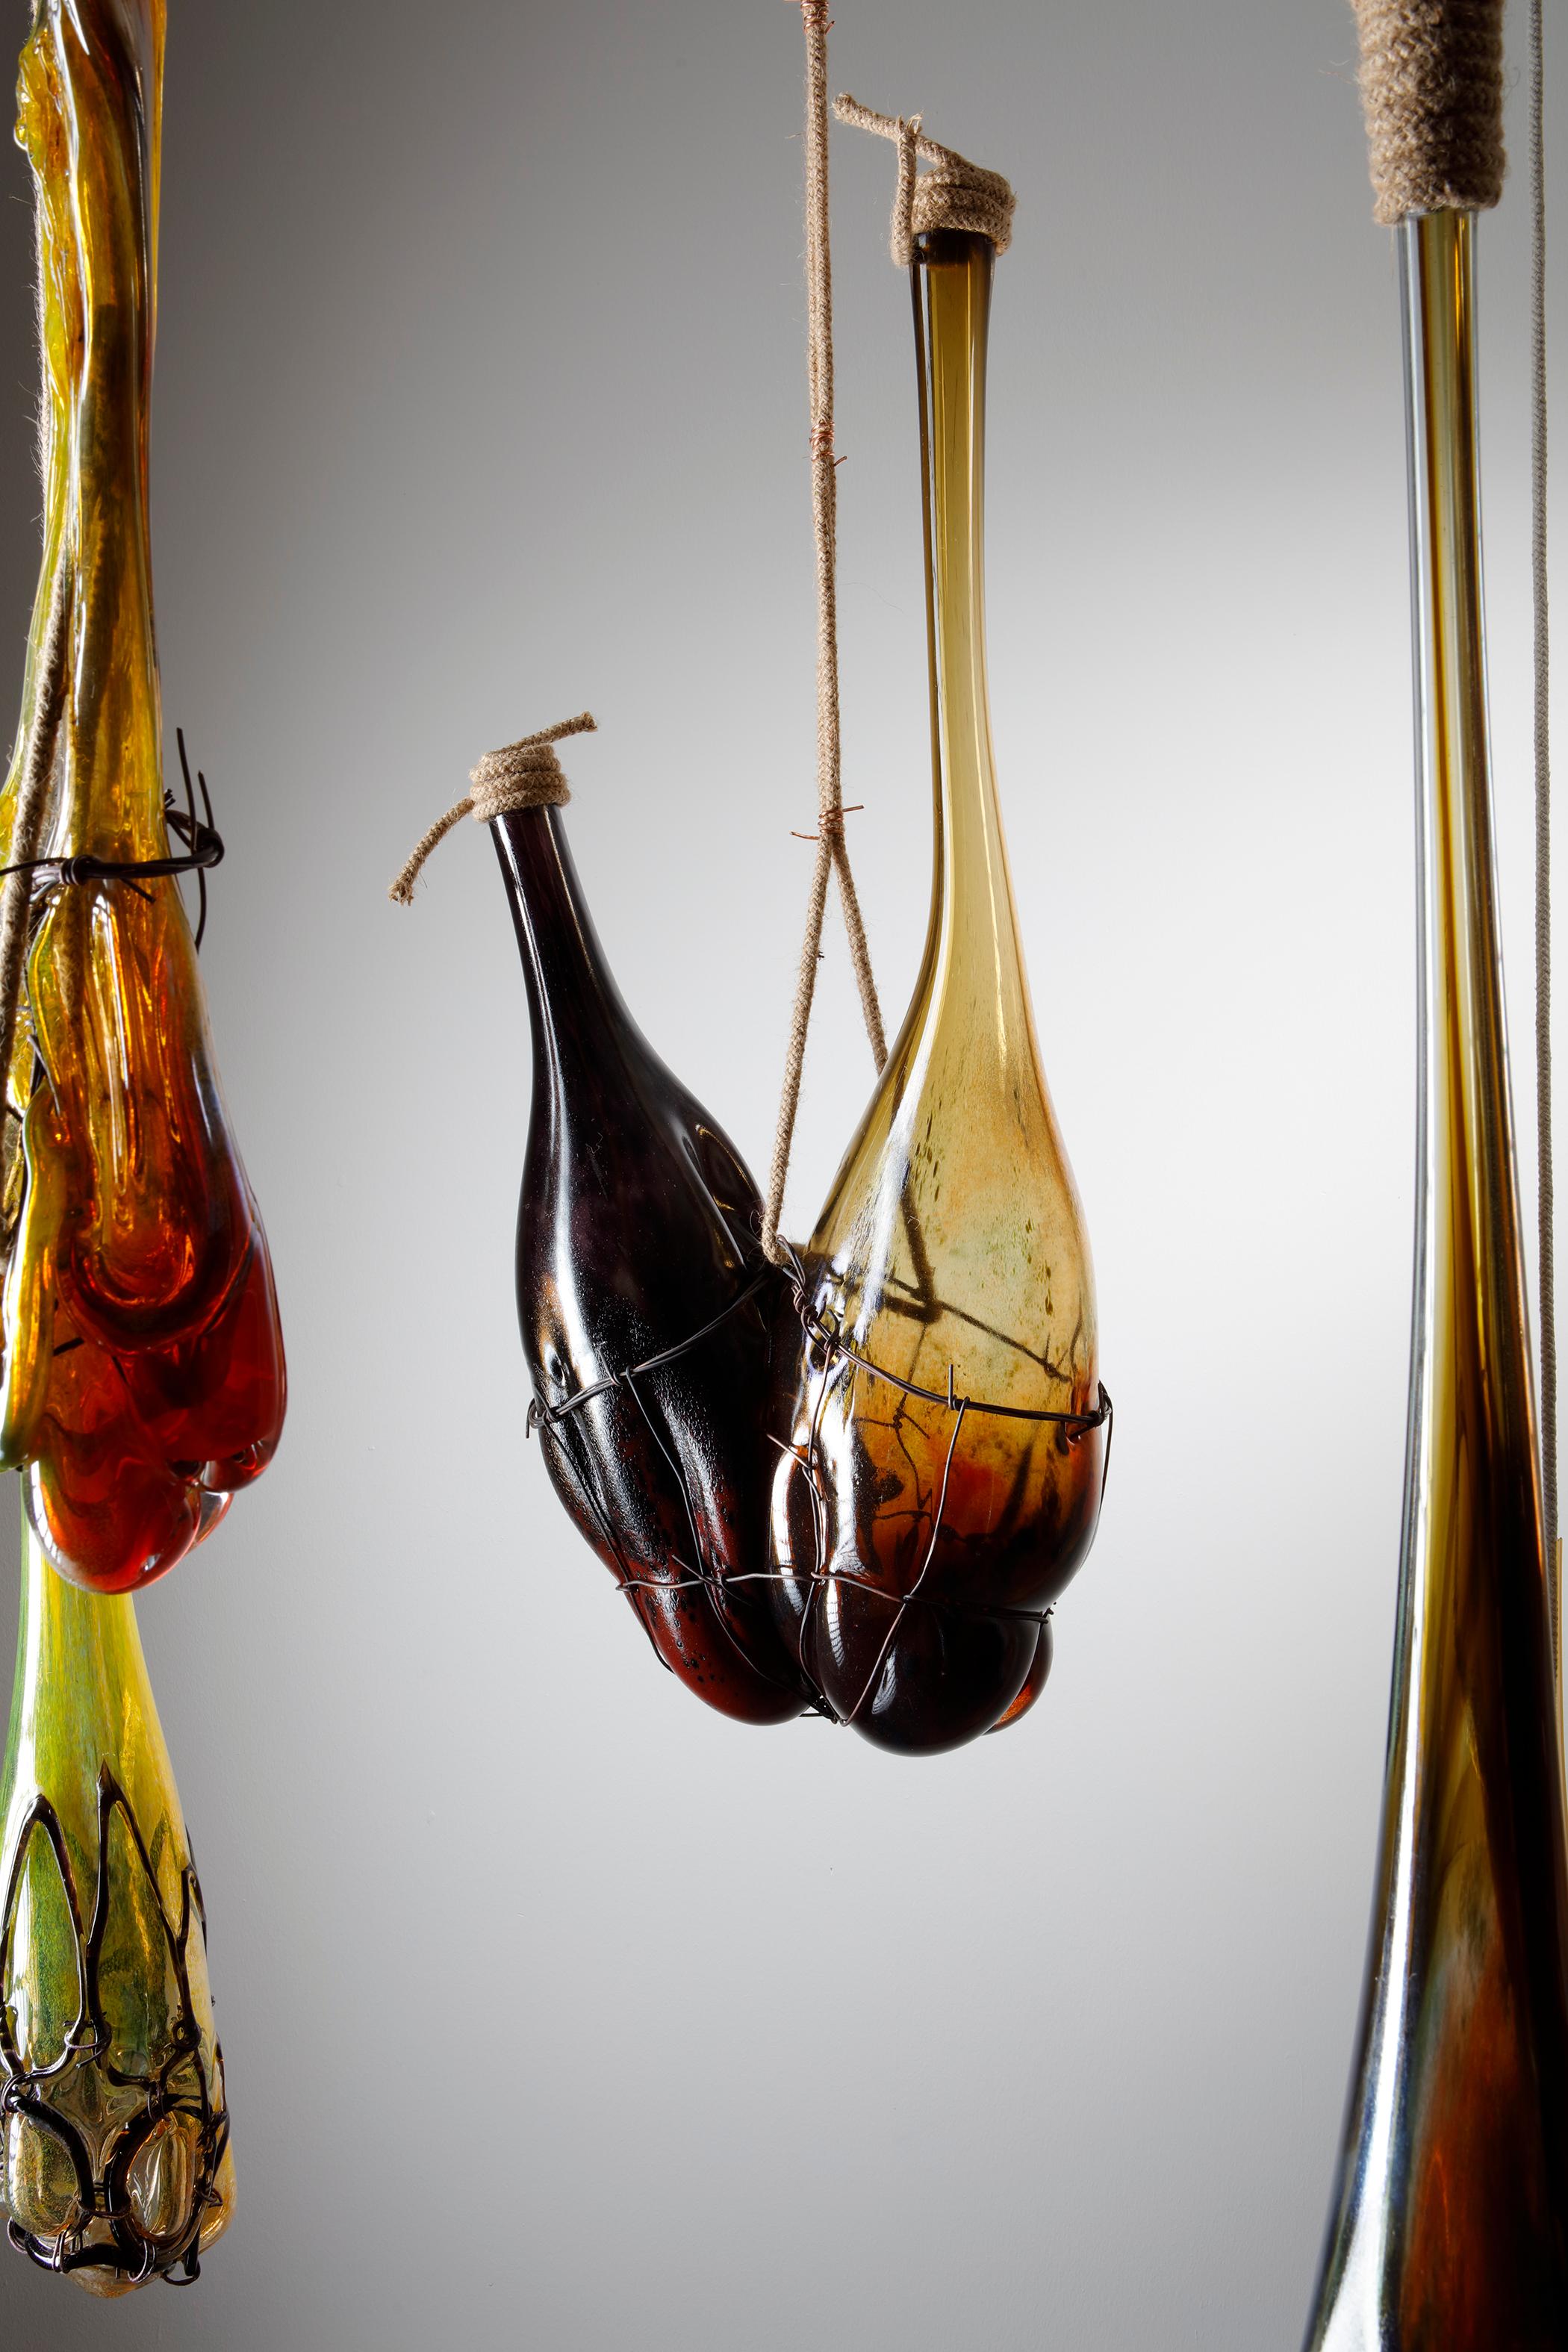 Hand-Crafted Strange Fruit Installation, a Unique Glass Hanging Sculpture by Chris Day For Sale